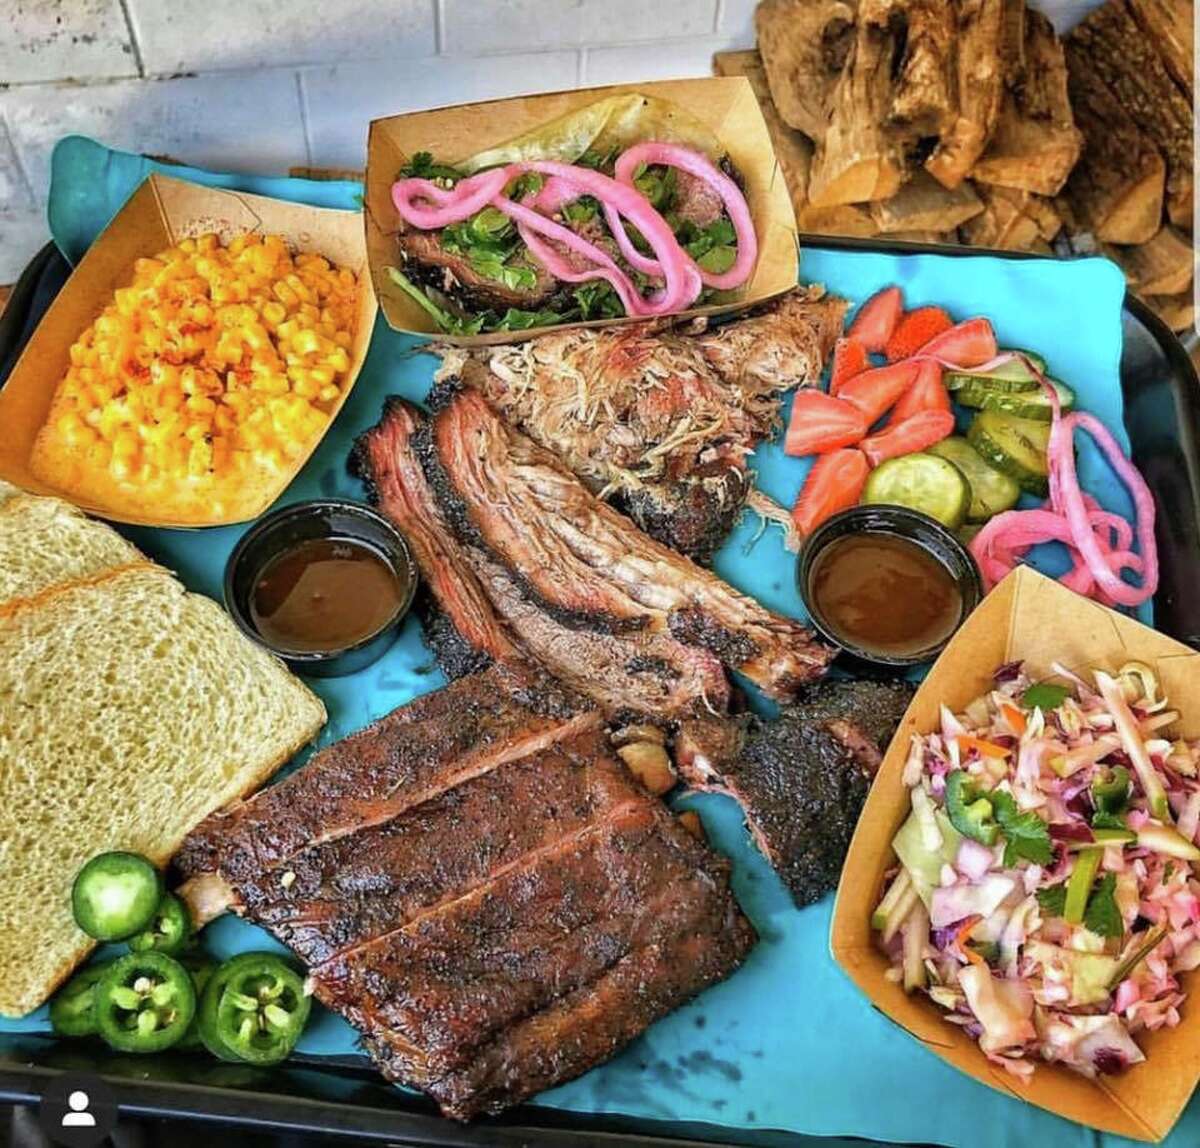 Pitmaster Tyler Harp of Harp Barbecue of Raytown, Mo., has introduced Central Texas-style craft barbecue to the Kansas City market during weekend pop-ups at Crane Brewing Co. in Raytown.